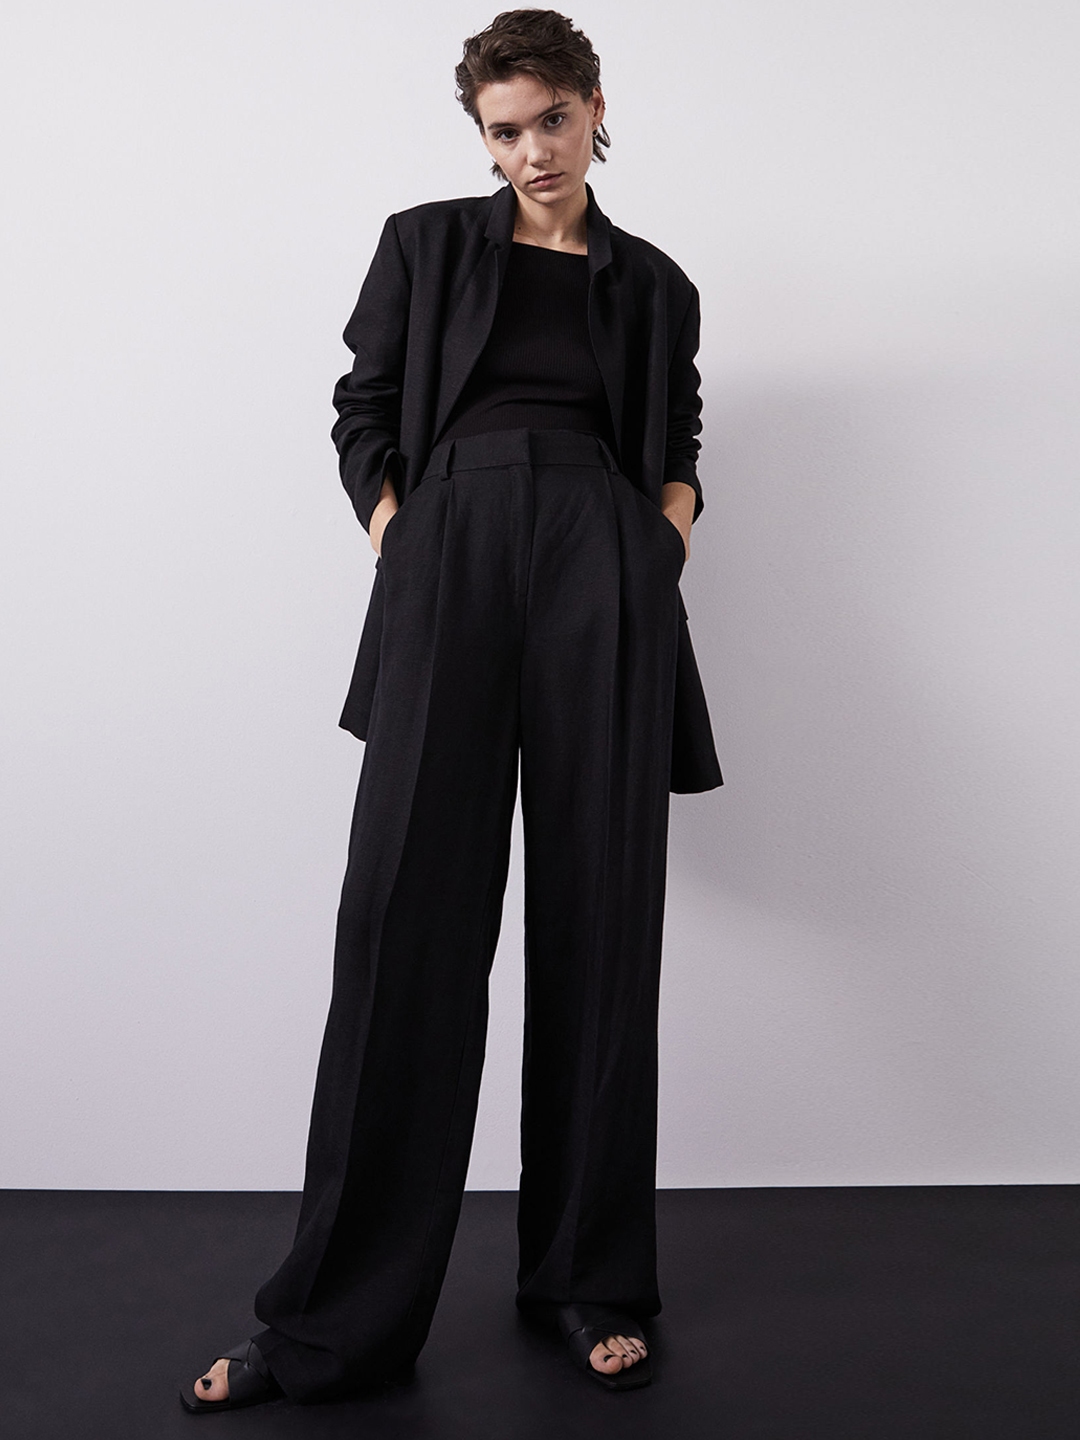 Buy H&M Woman Black CottonWide Trousers - Trousers for Women 13910910 ...